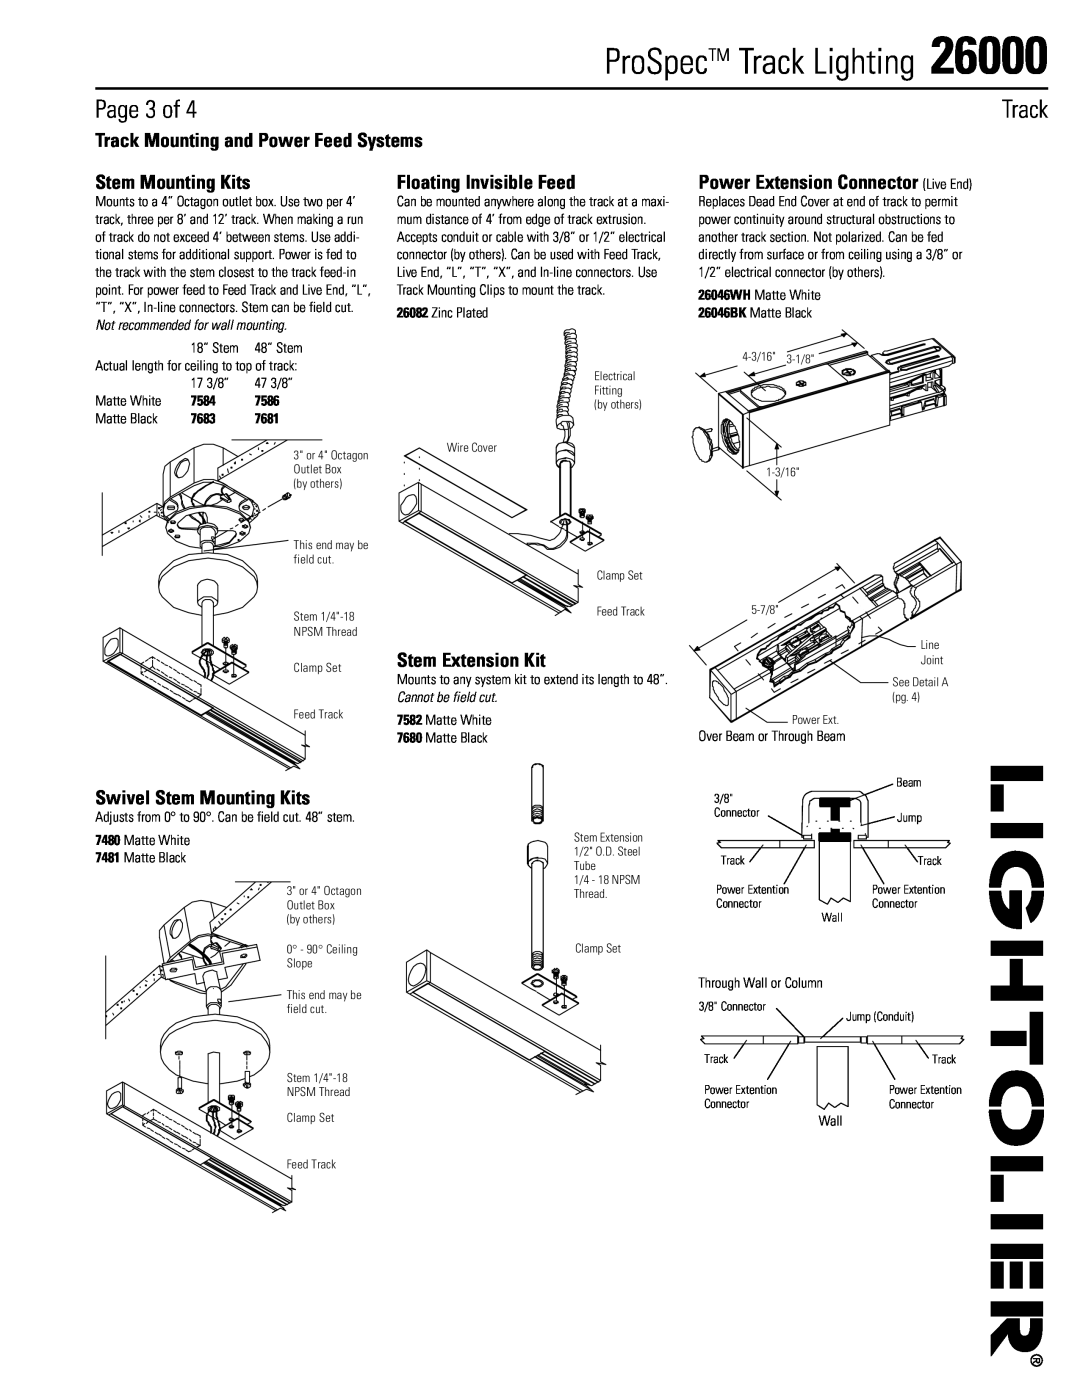 Lightolier 26000 manual Page 3 of, Stem Mounting Kits, Floating Invisible Feed, Power Extension Connector Live End, Track 